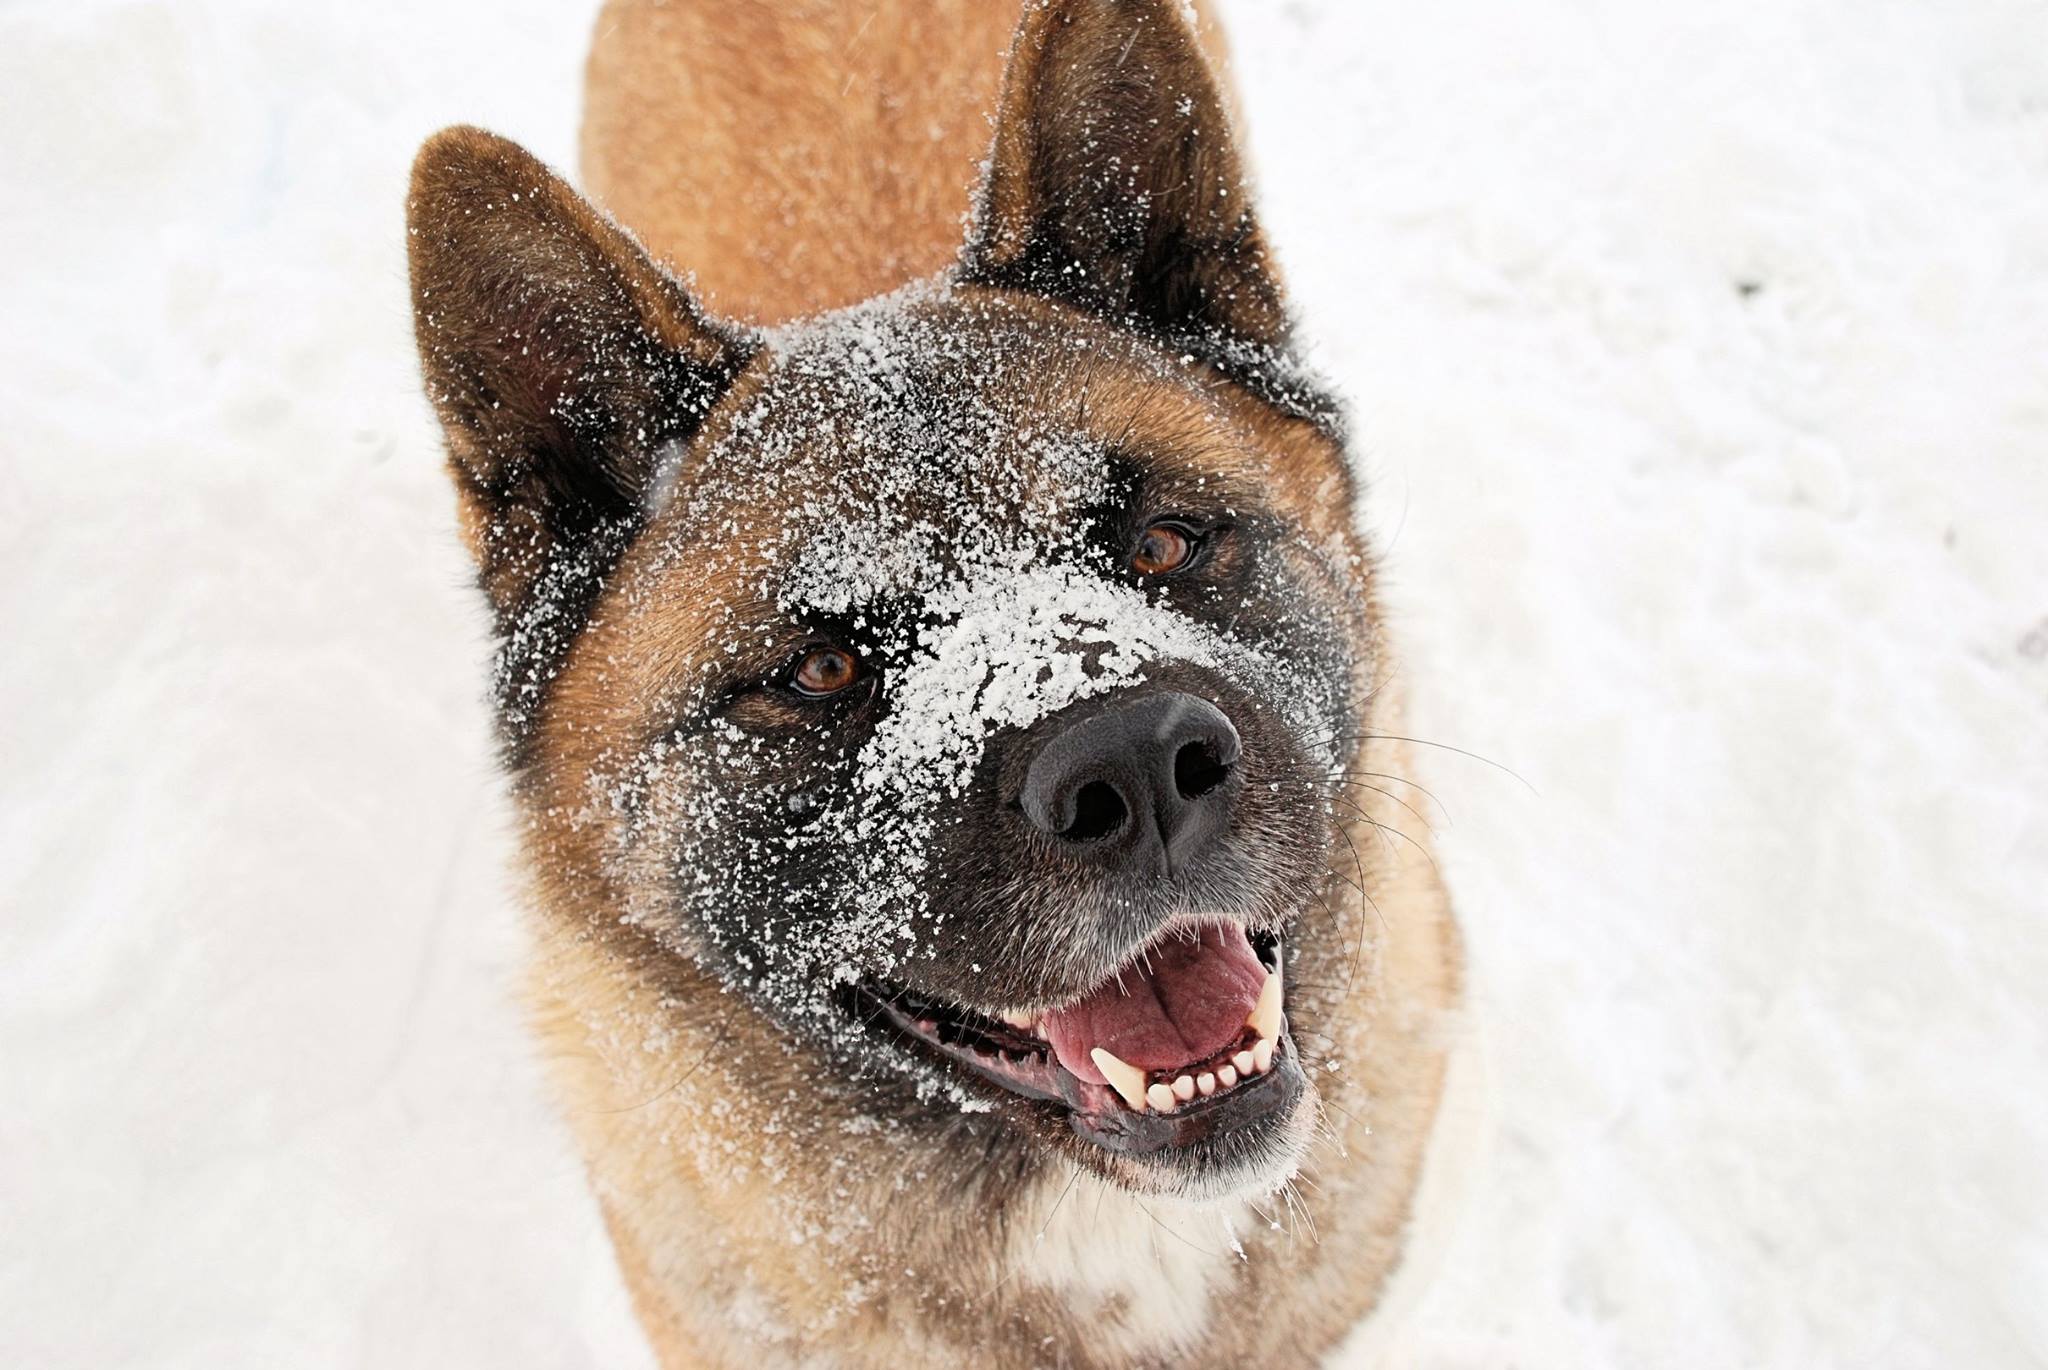 An Akita Inu with snow on its face looking up smiling